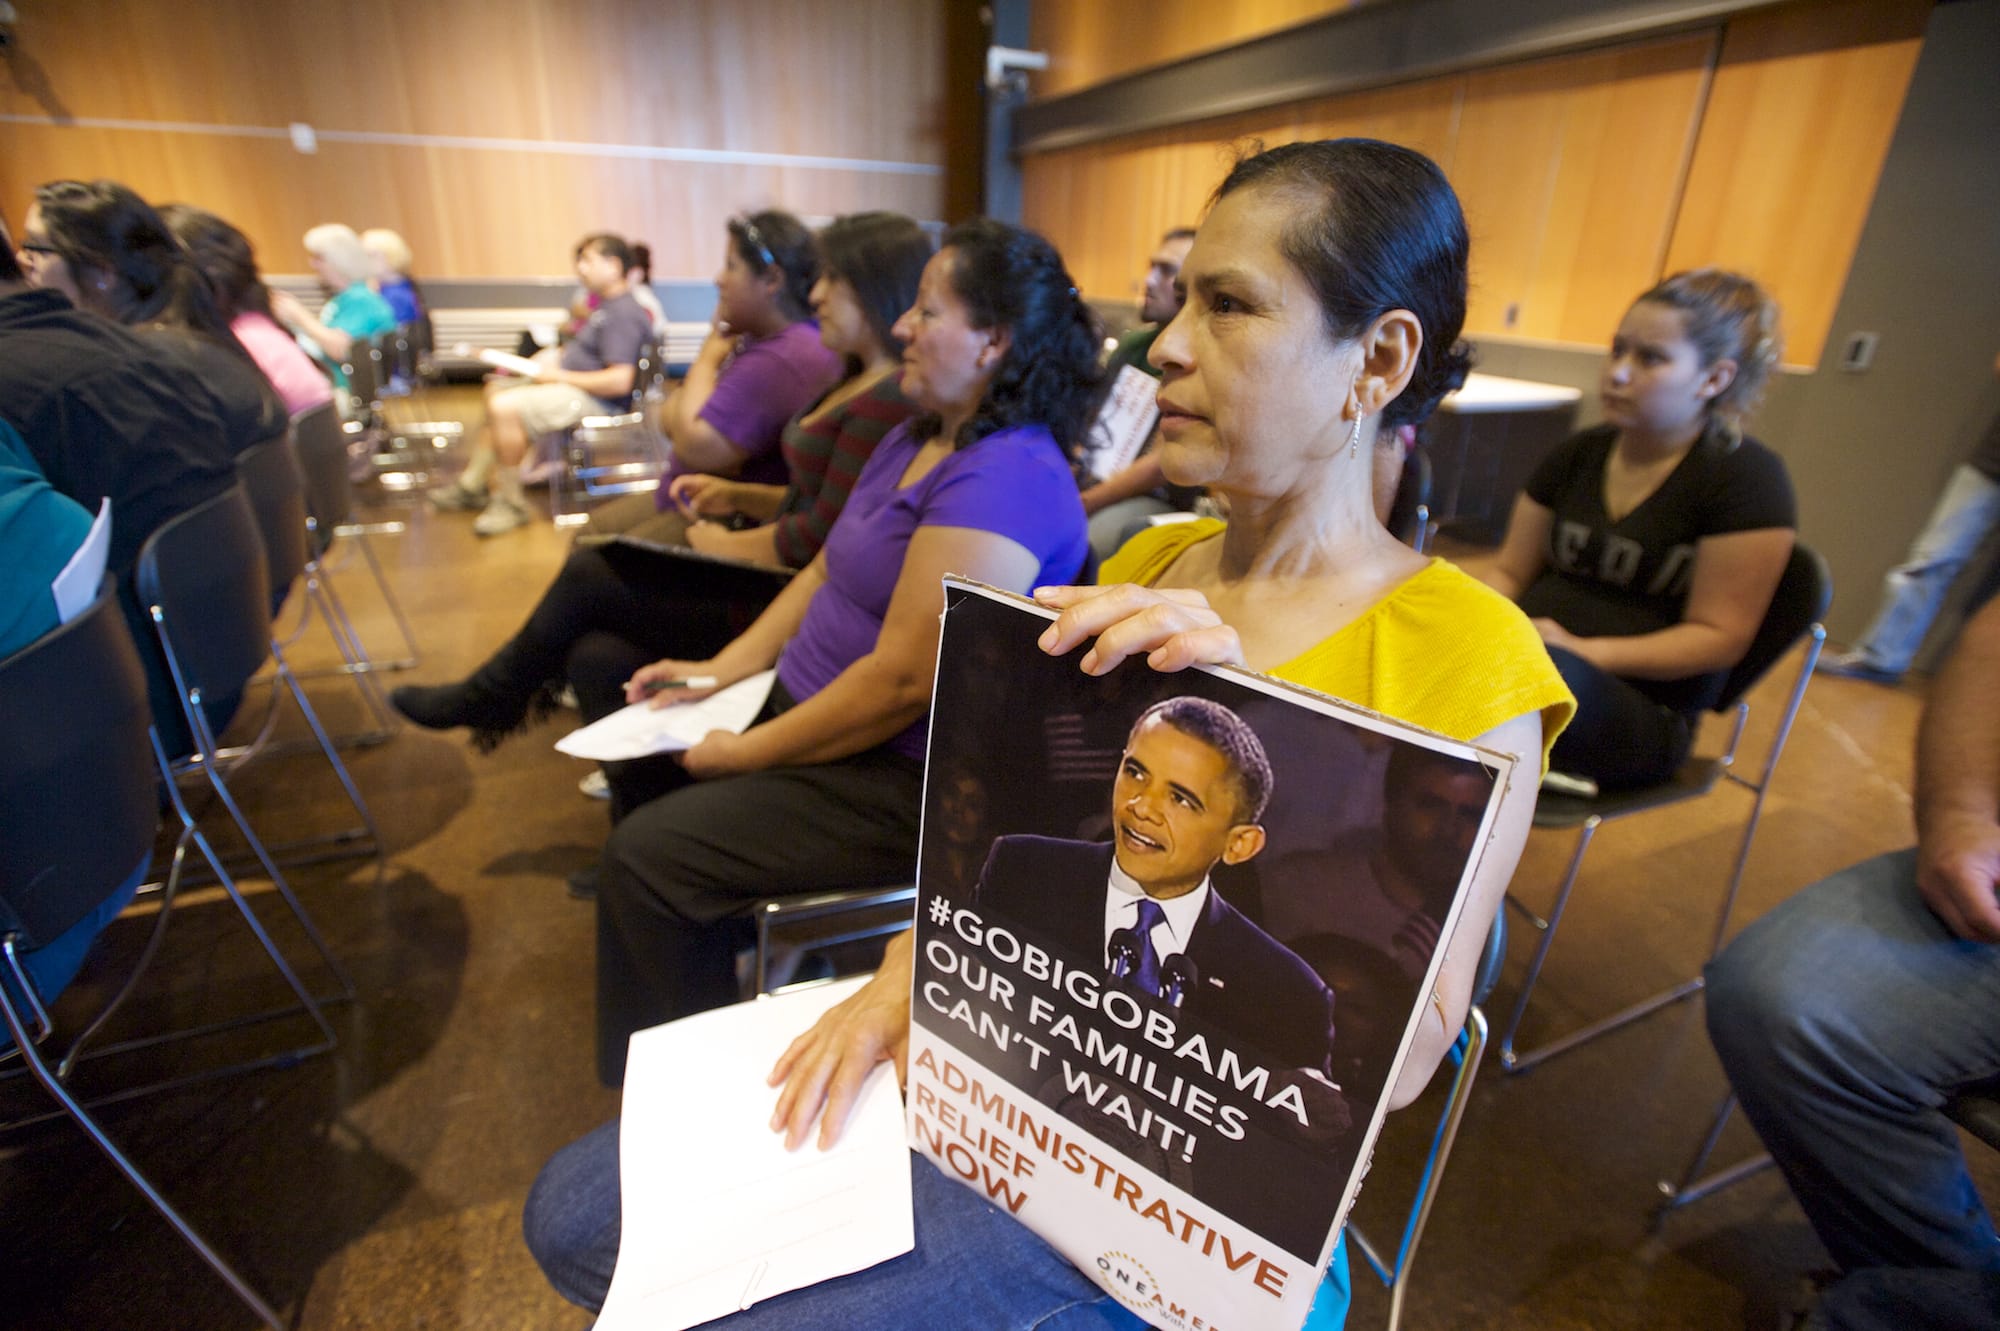 Gloria Torres of Vancouver attends a OneAmerica town hall meeting at the Vancouver Community Library on Thursday to show her support for changes to the nation's immigration policies.